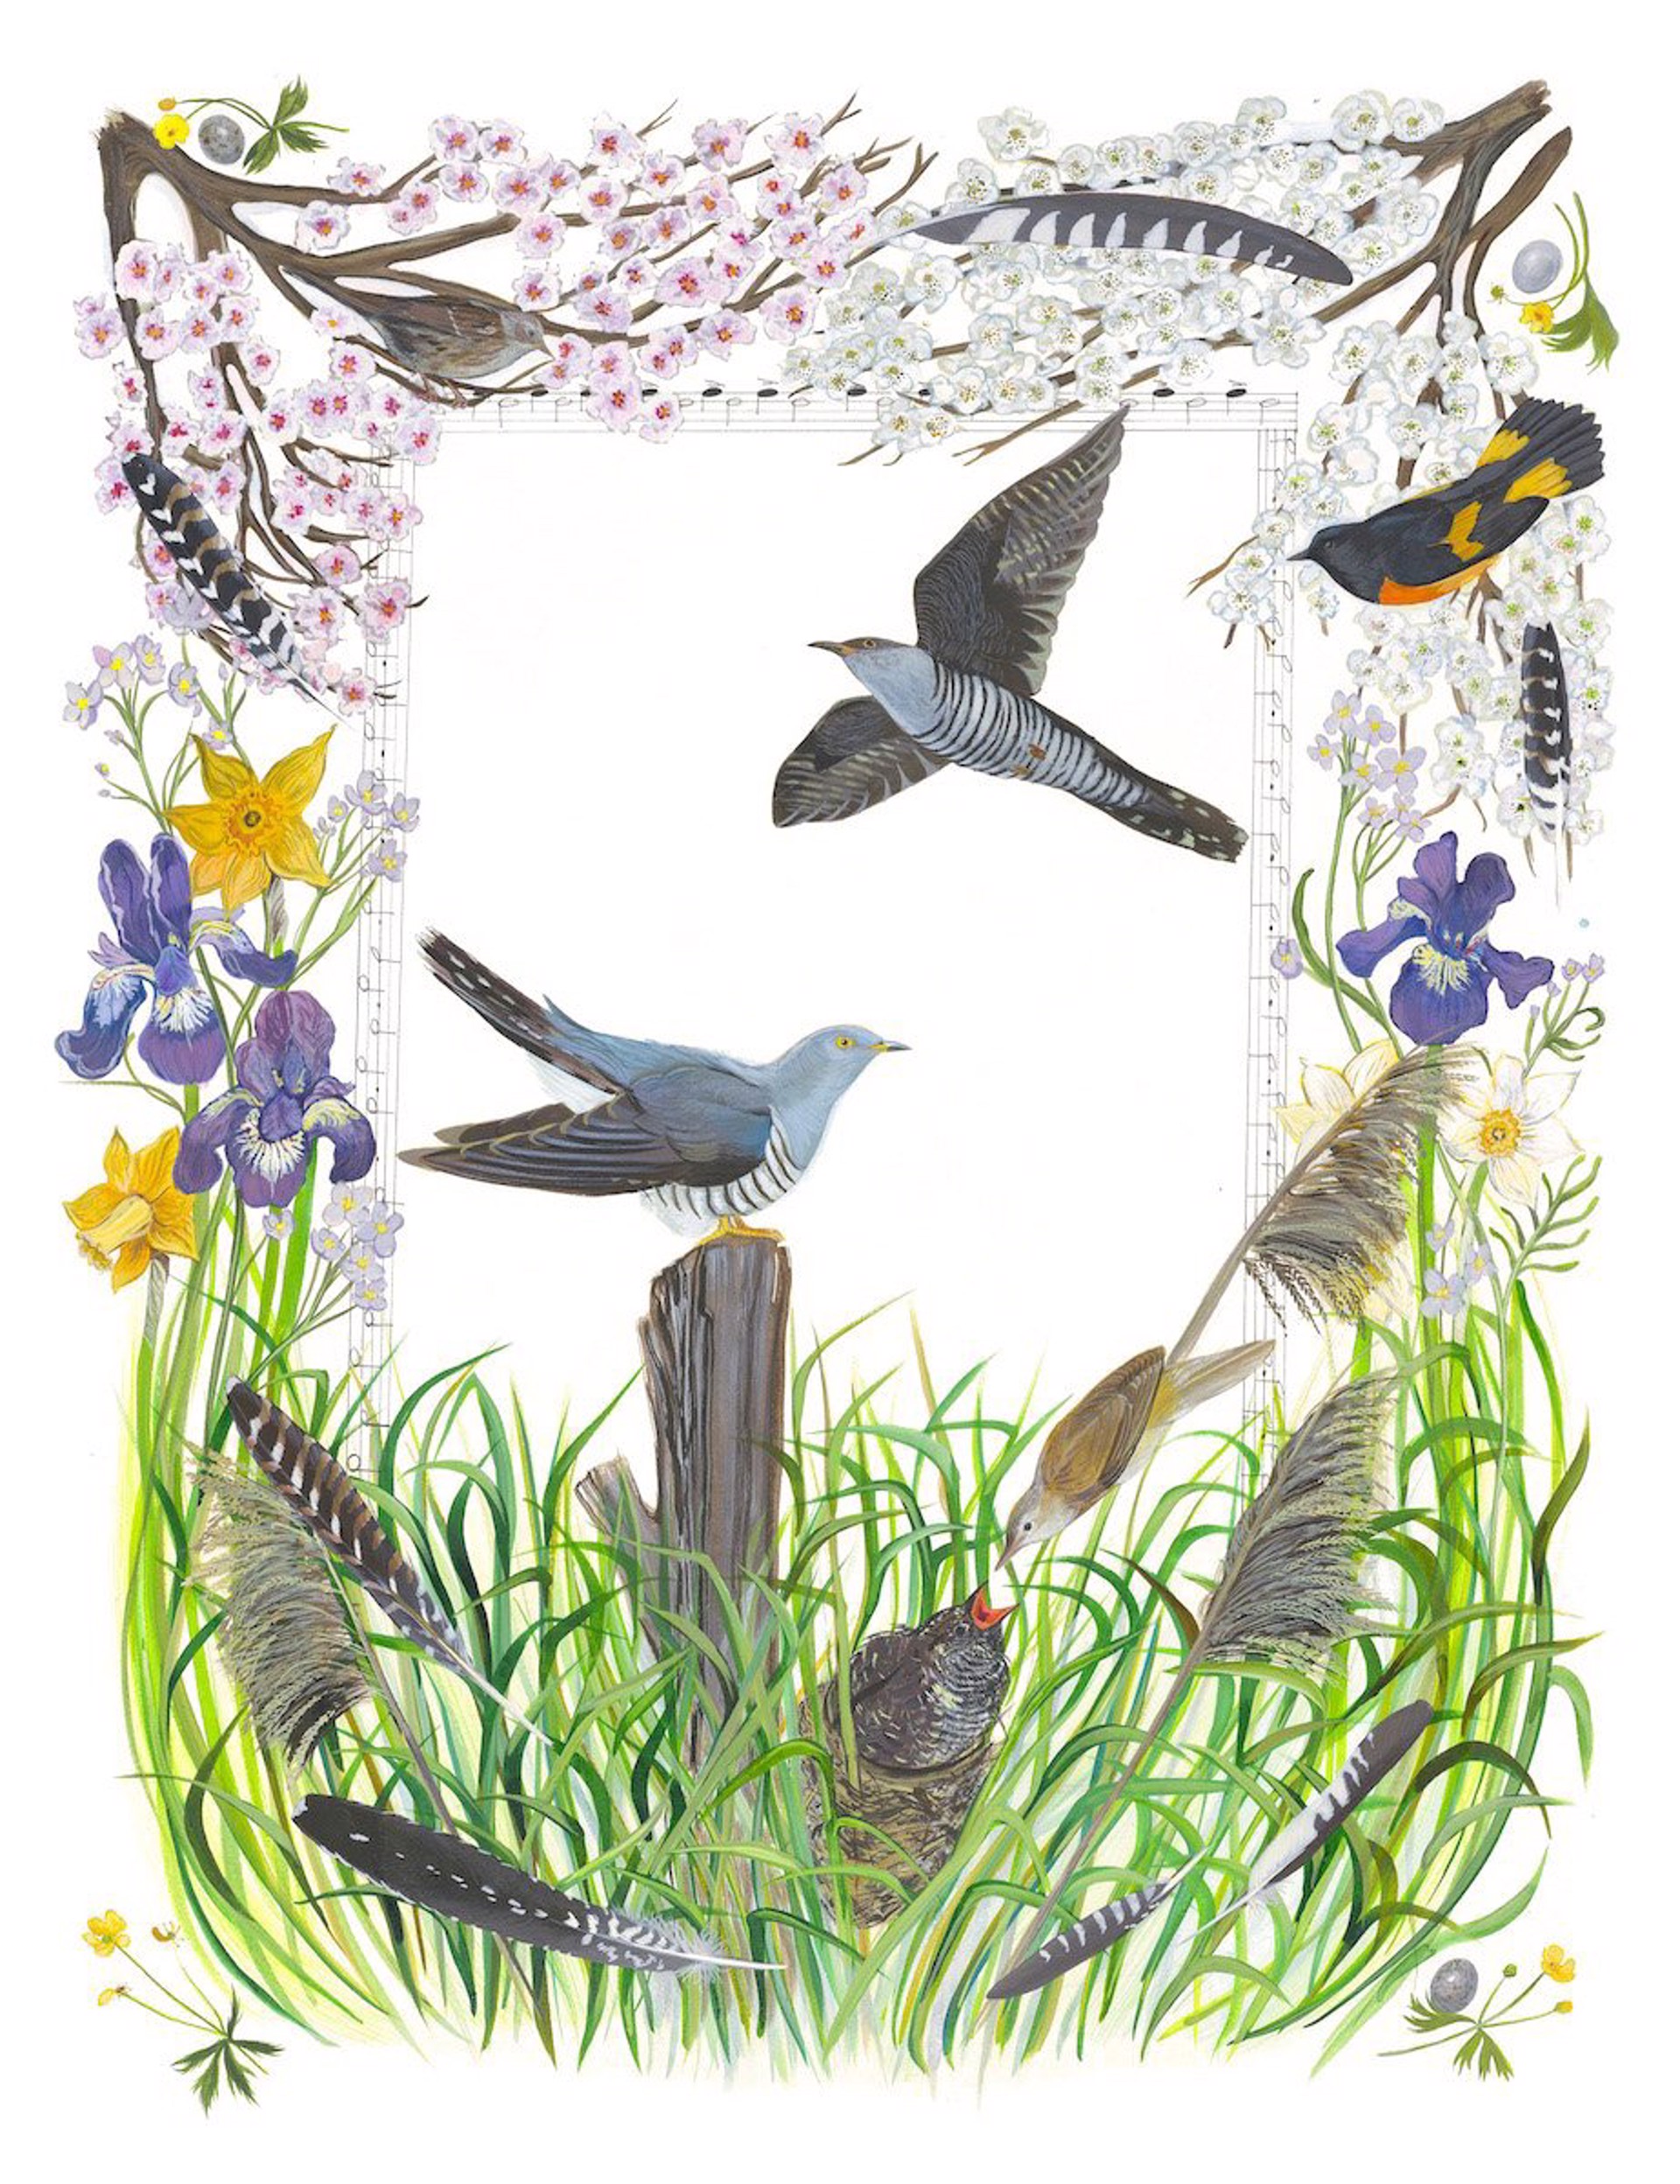 Birds of Shakespeare: Common Cuckoo by Missy Dunaway